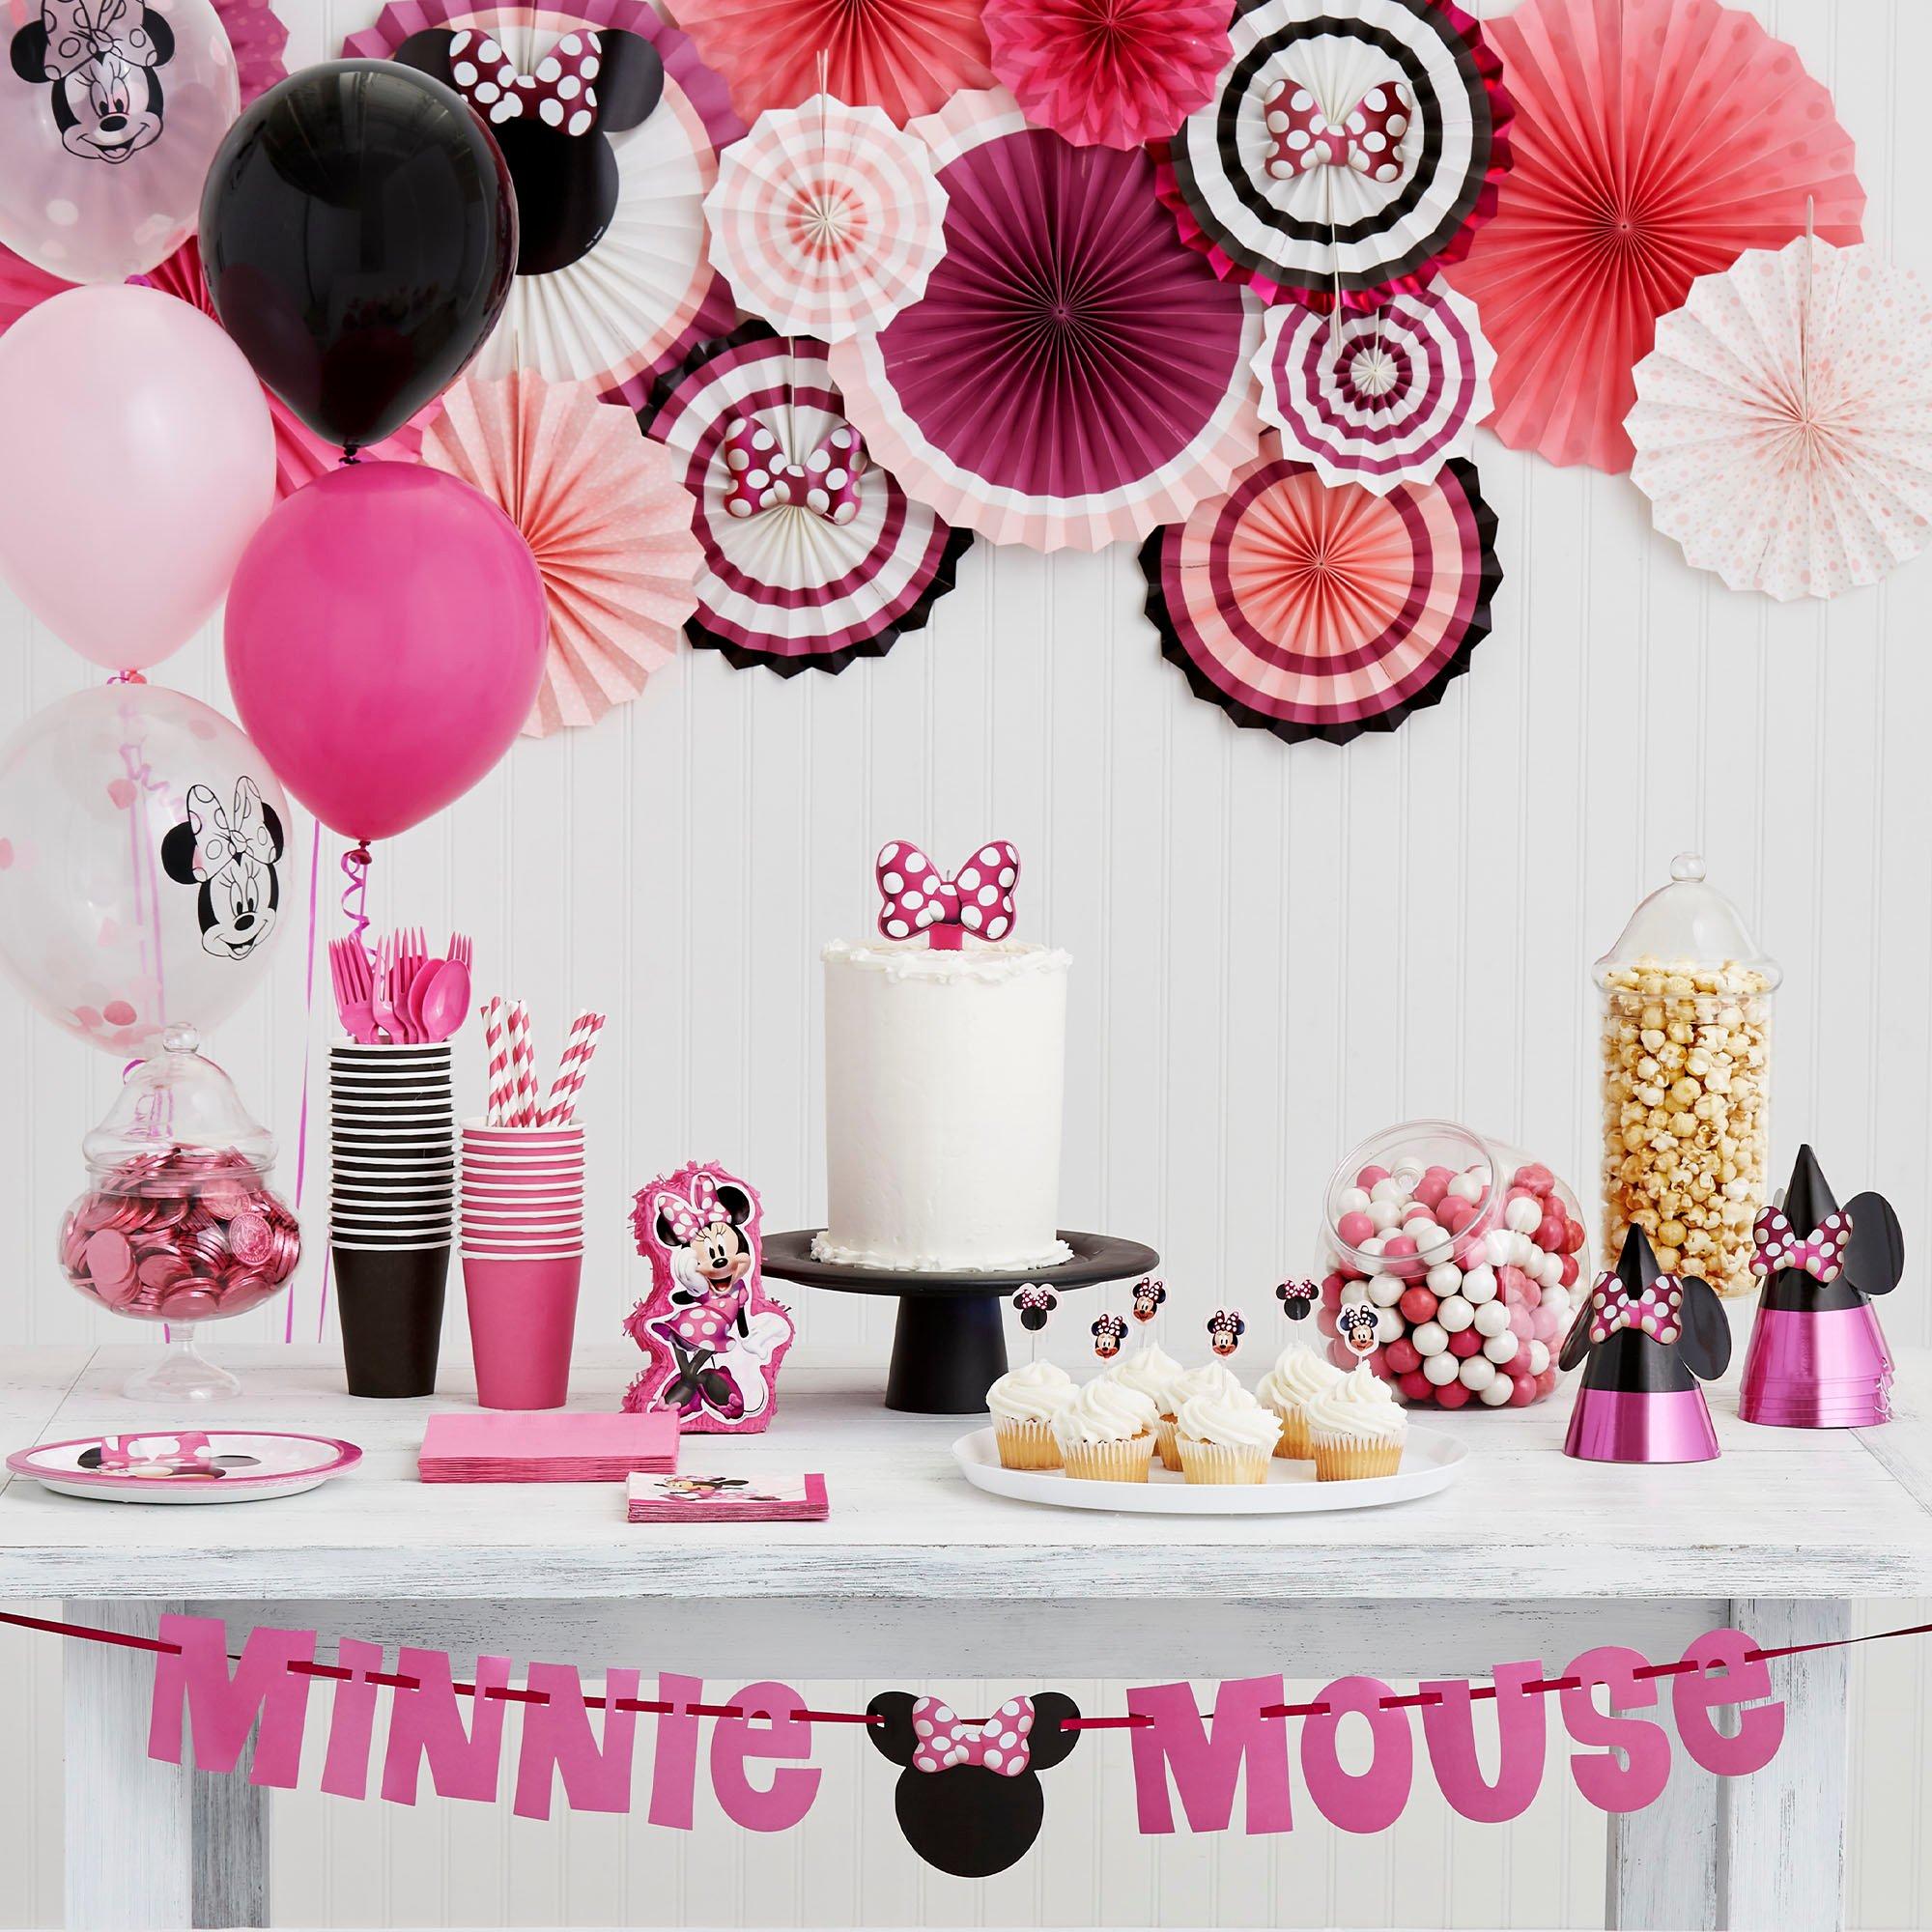 Minnie Mouse Birthday Party Decoration